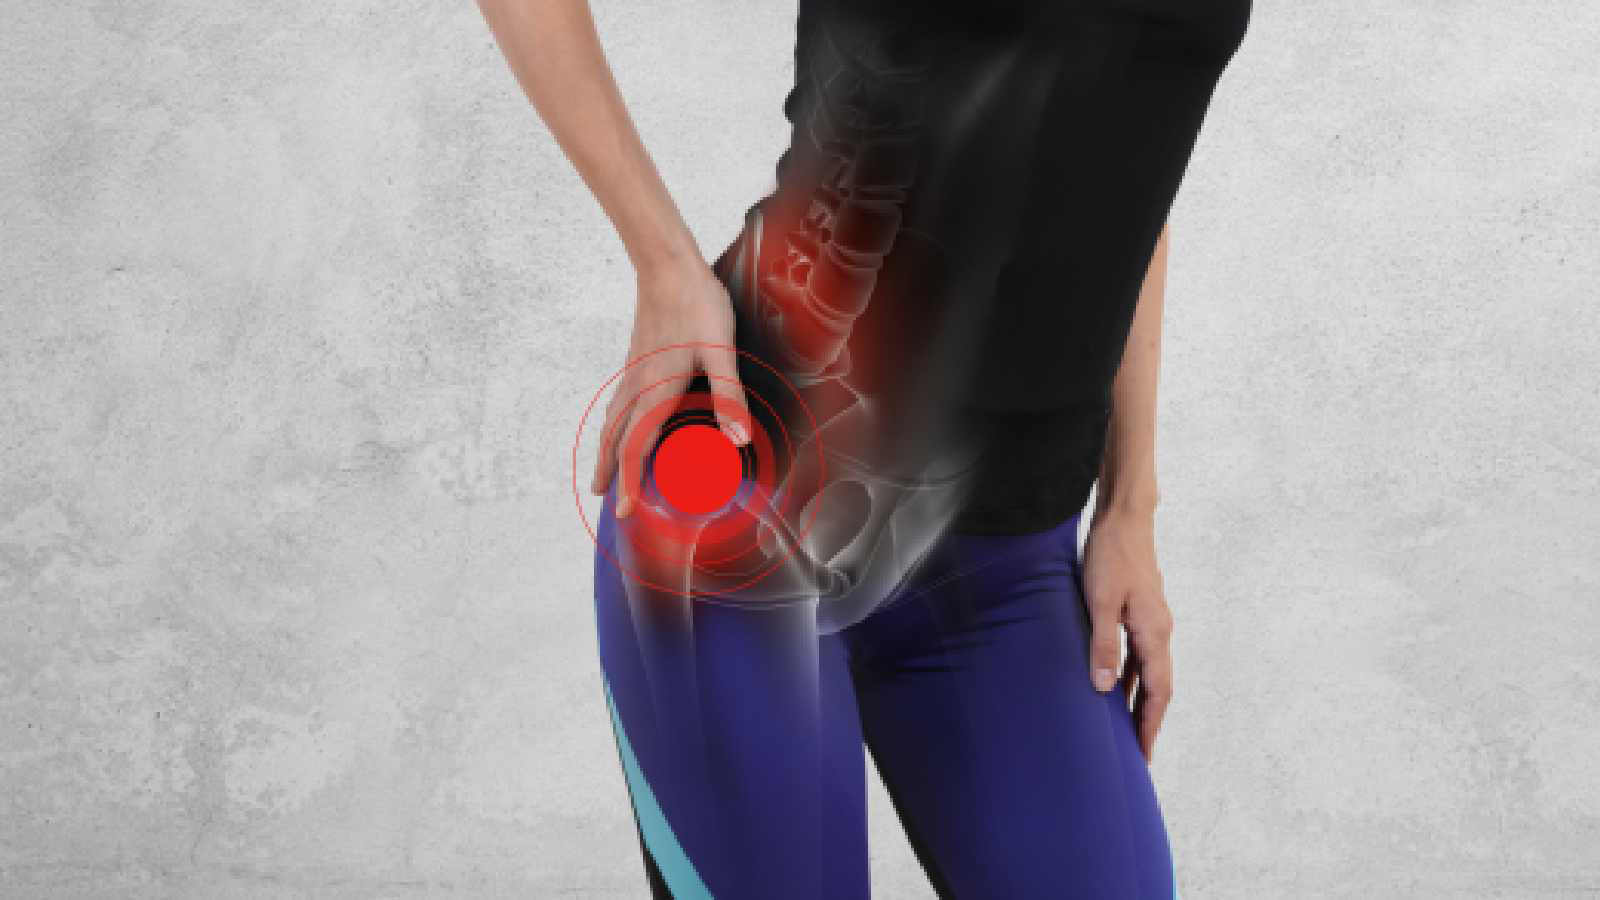 5 exercises to reduce hip pain and make hip joints stronger